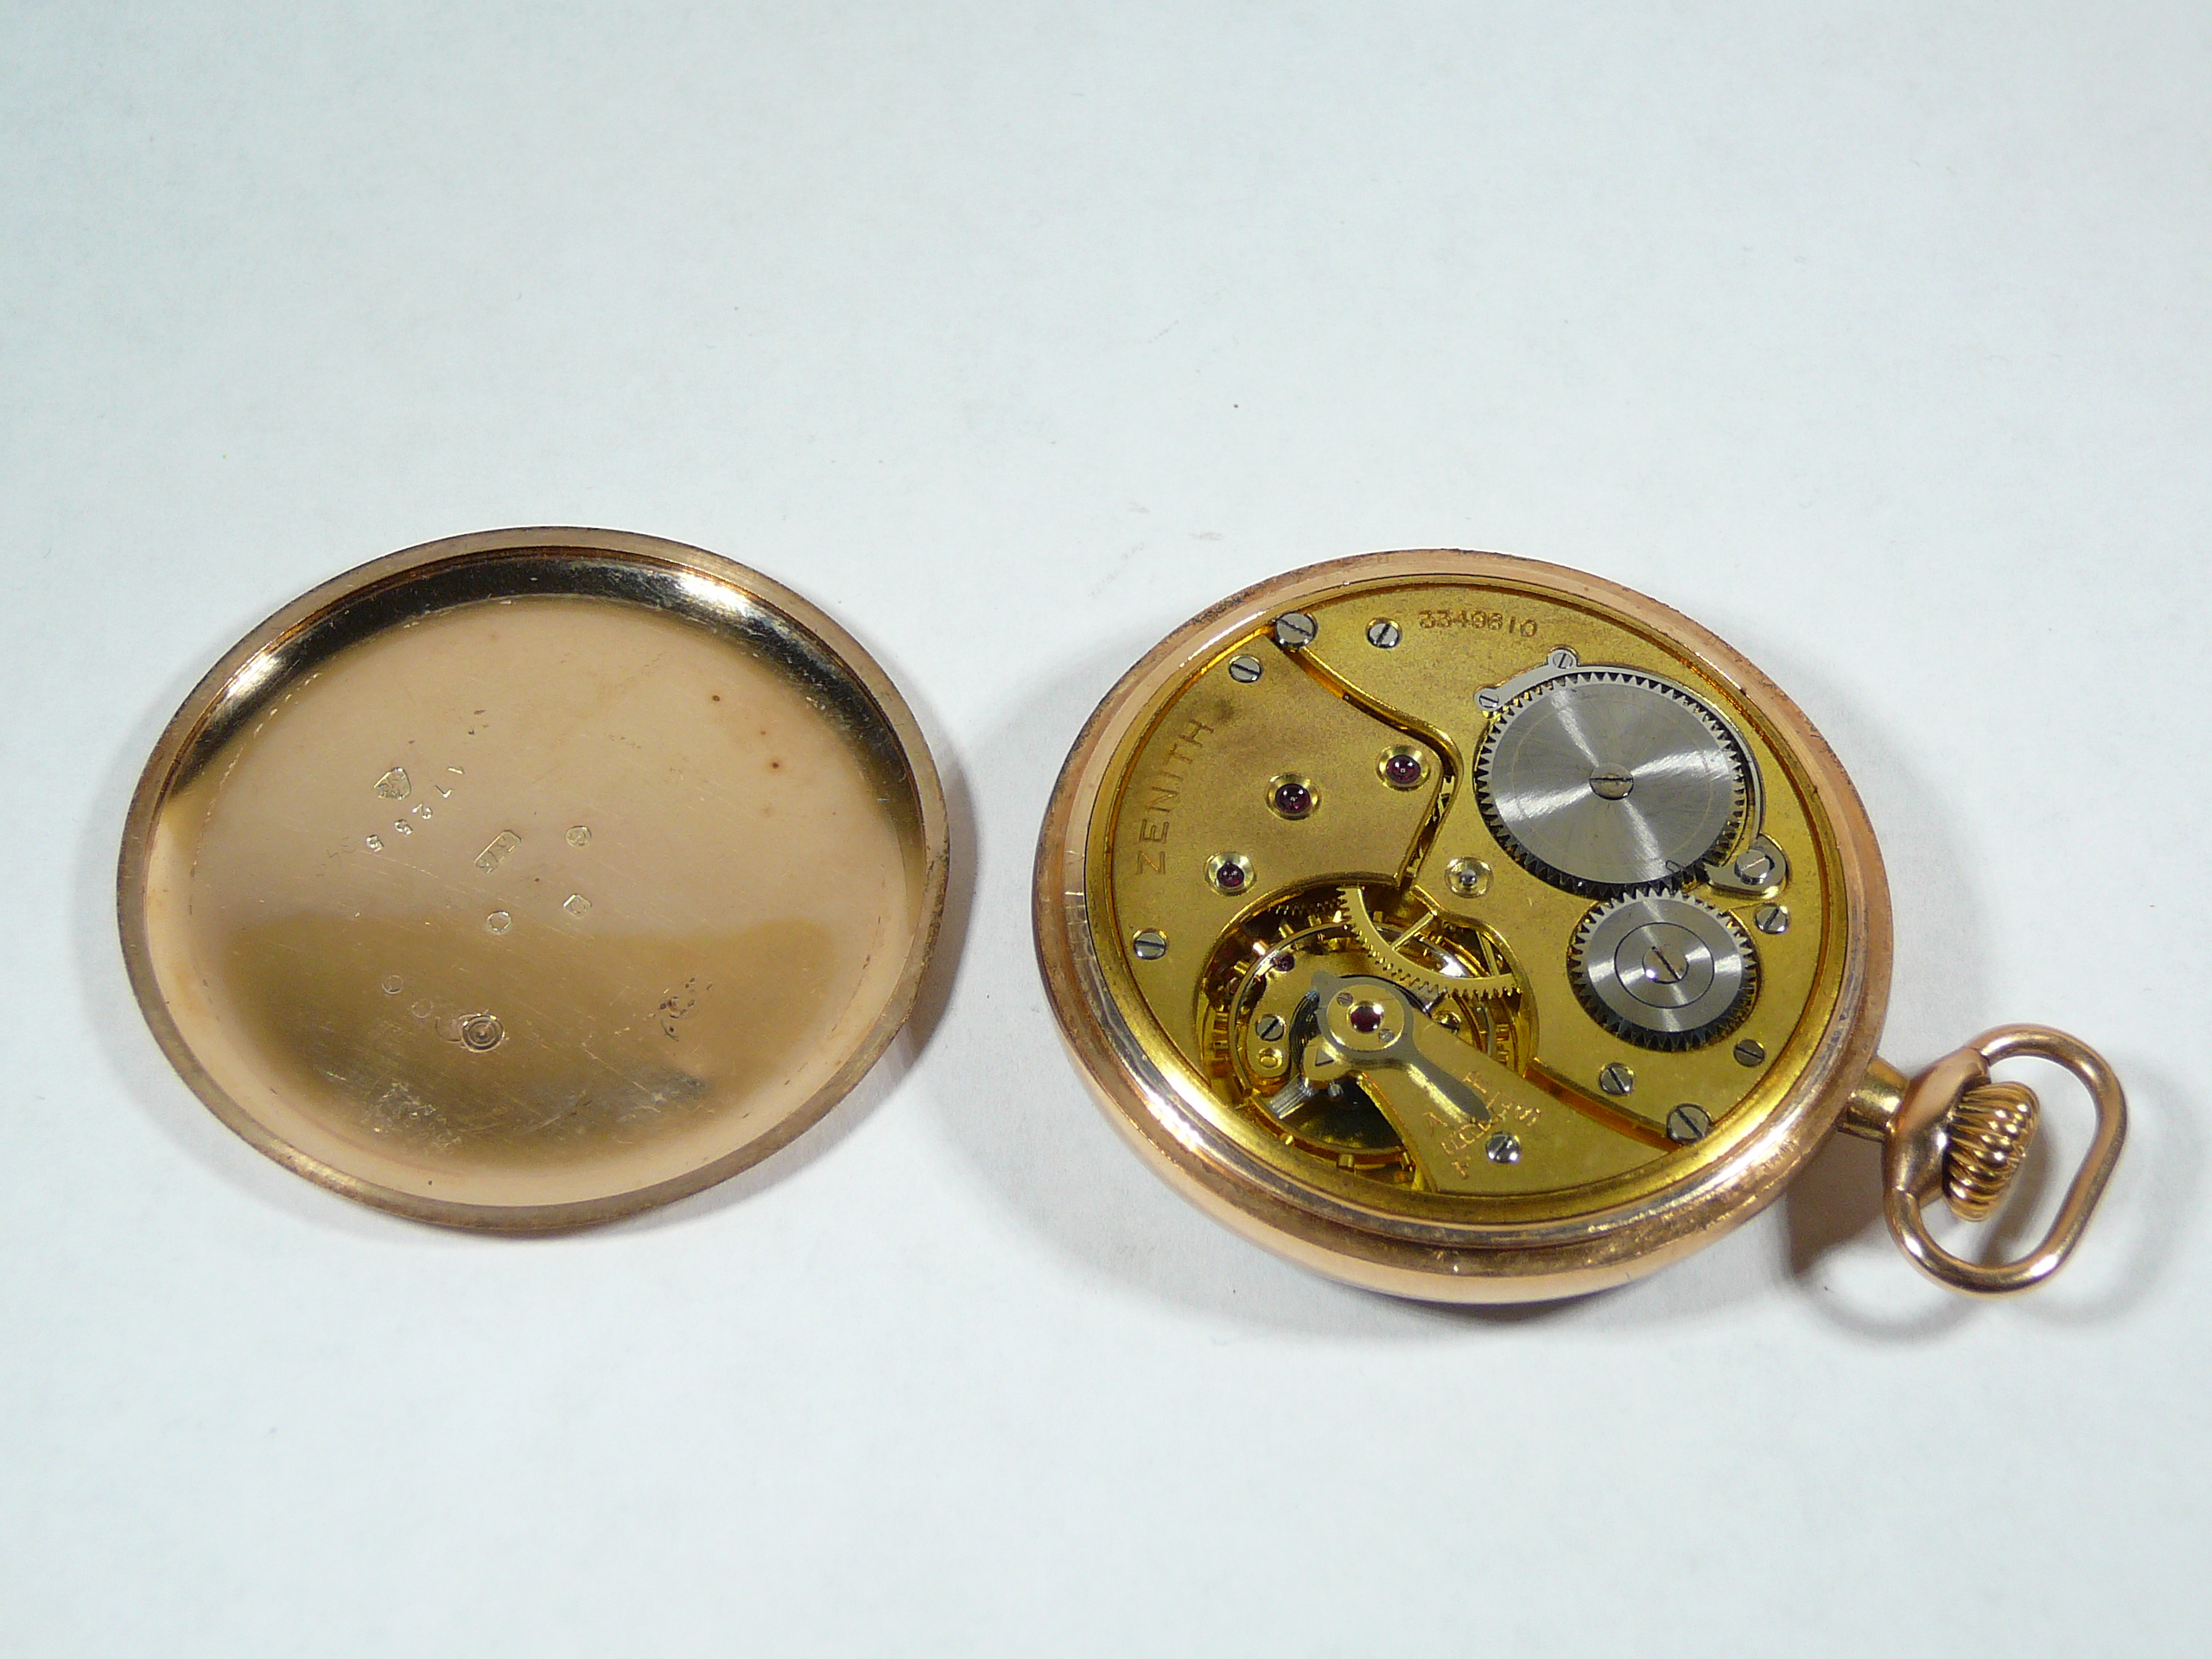 Gents Gold Zenith Pocket Watch - Image 3 of 3